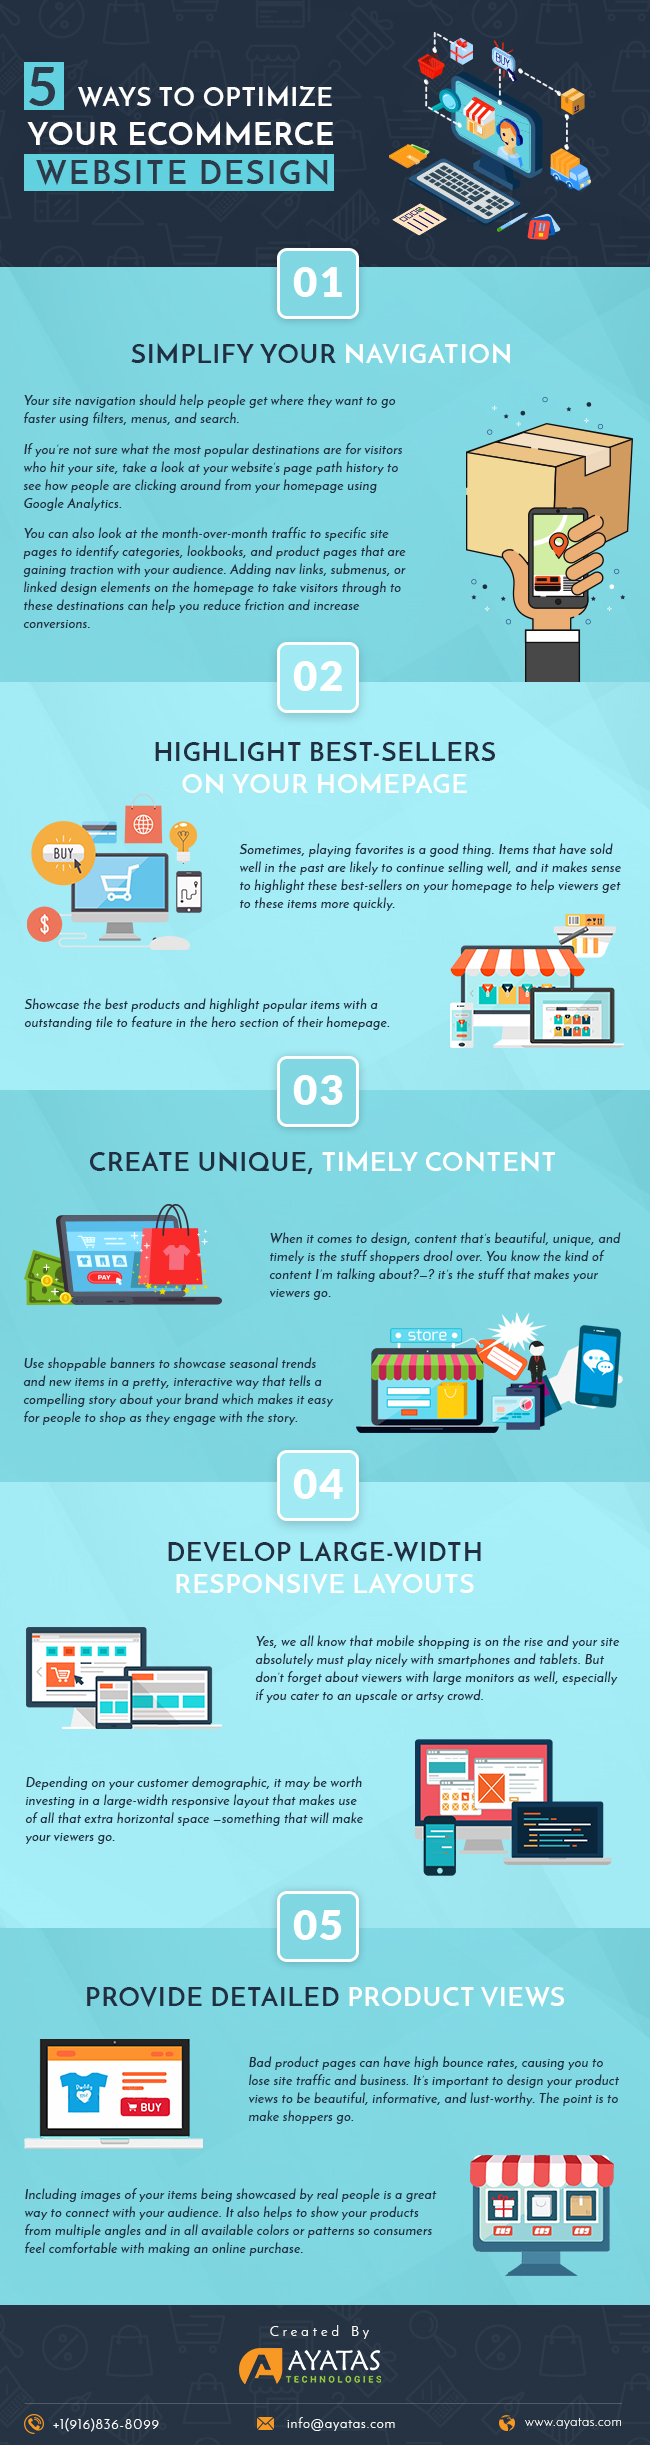 5 Simple Ways to Optimize your eCommerce Website Design [Infographic]